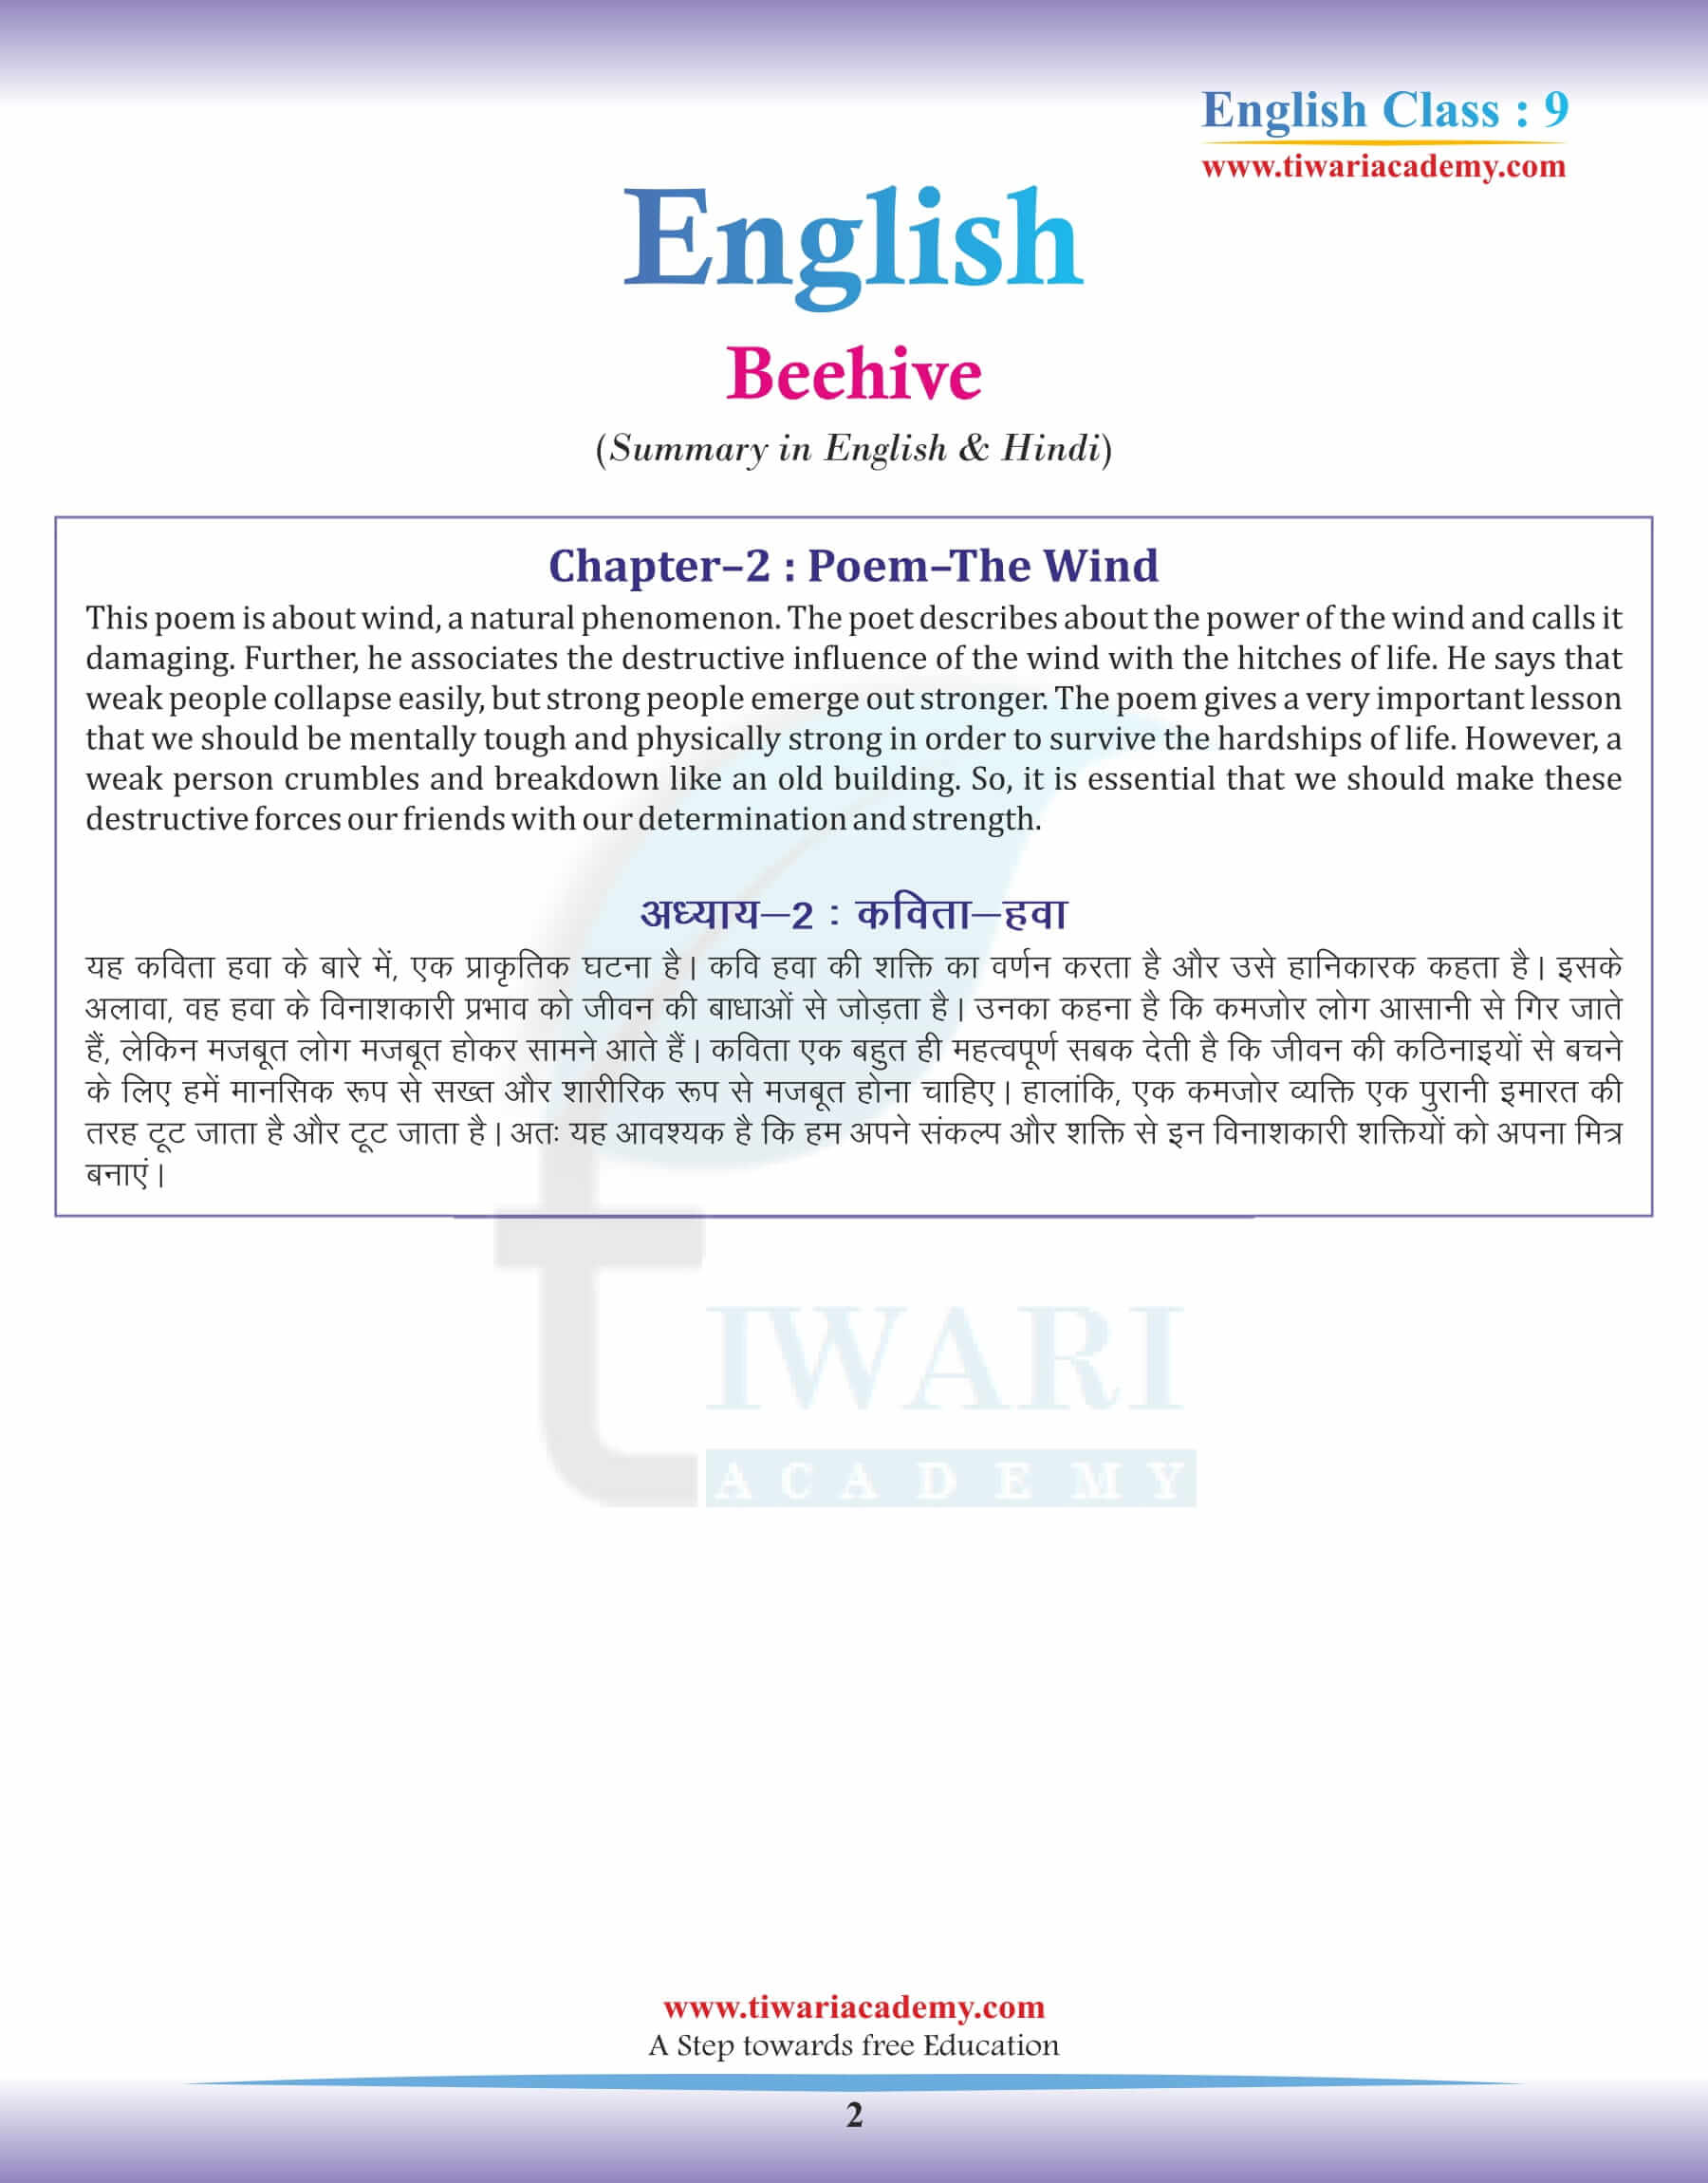 9th English Beehive Chapter 2 Summary Poem in Hindi and English